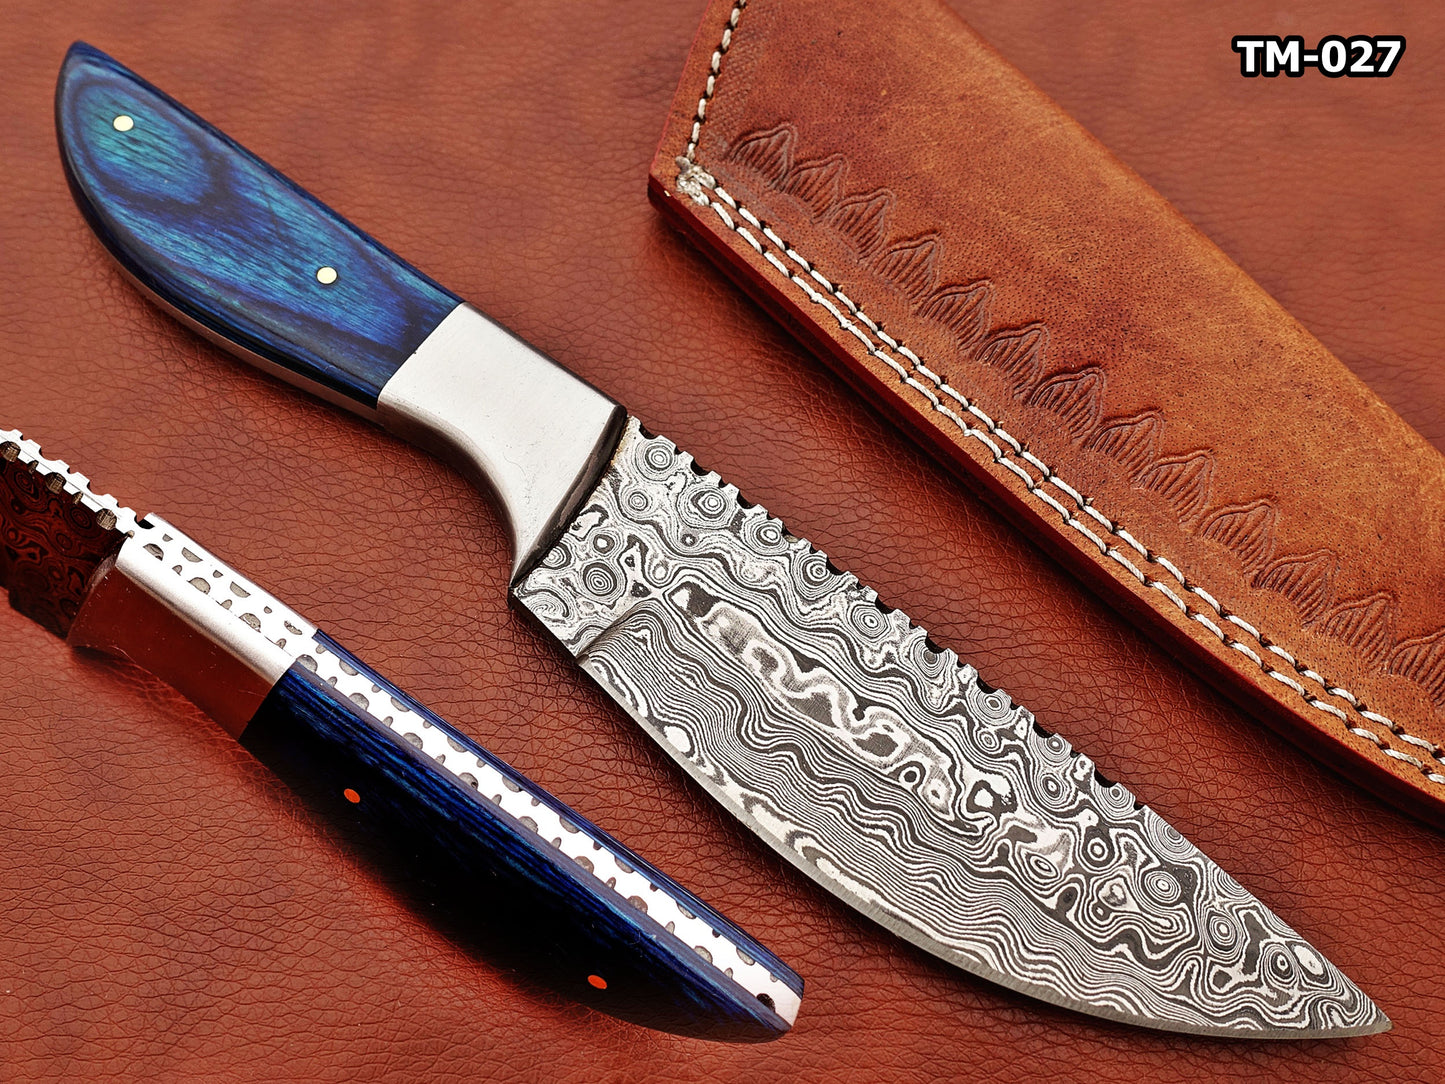 9.5" full tang Rain drop pattern skinning knife, 5" straight back Damascus steel blade, Available in 4 colors,  includes Cow hide Leather sheath